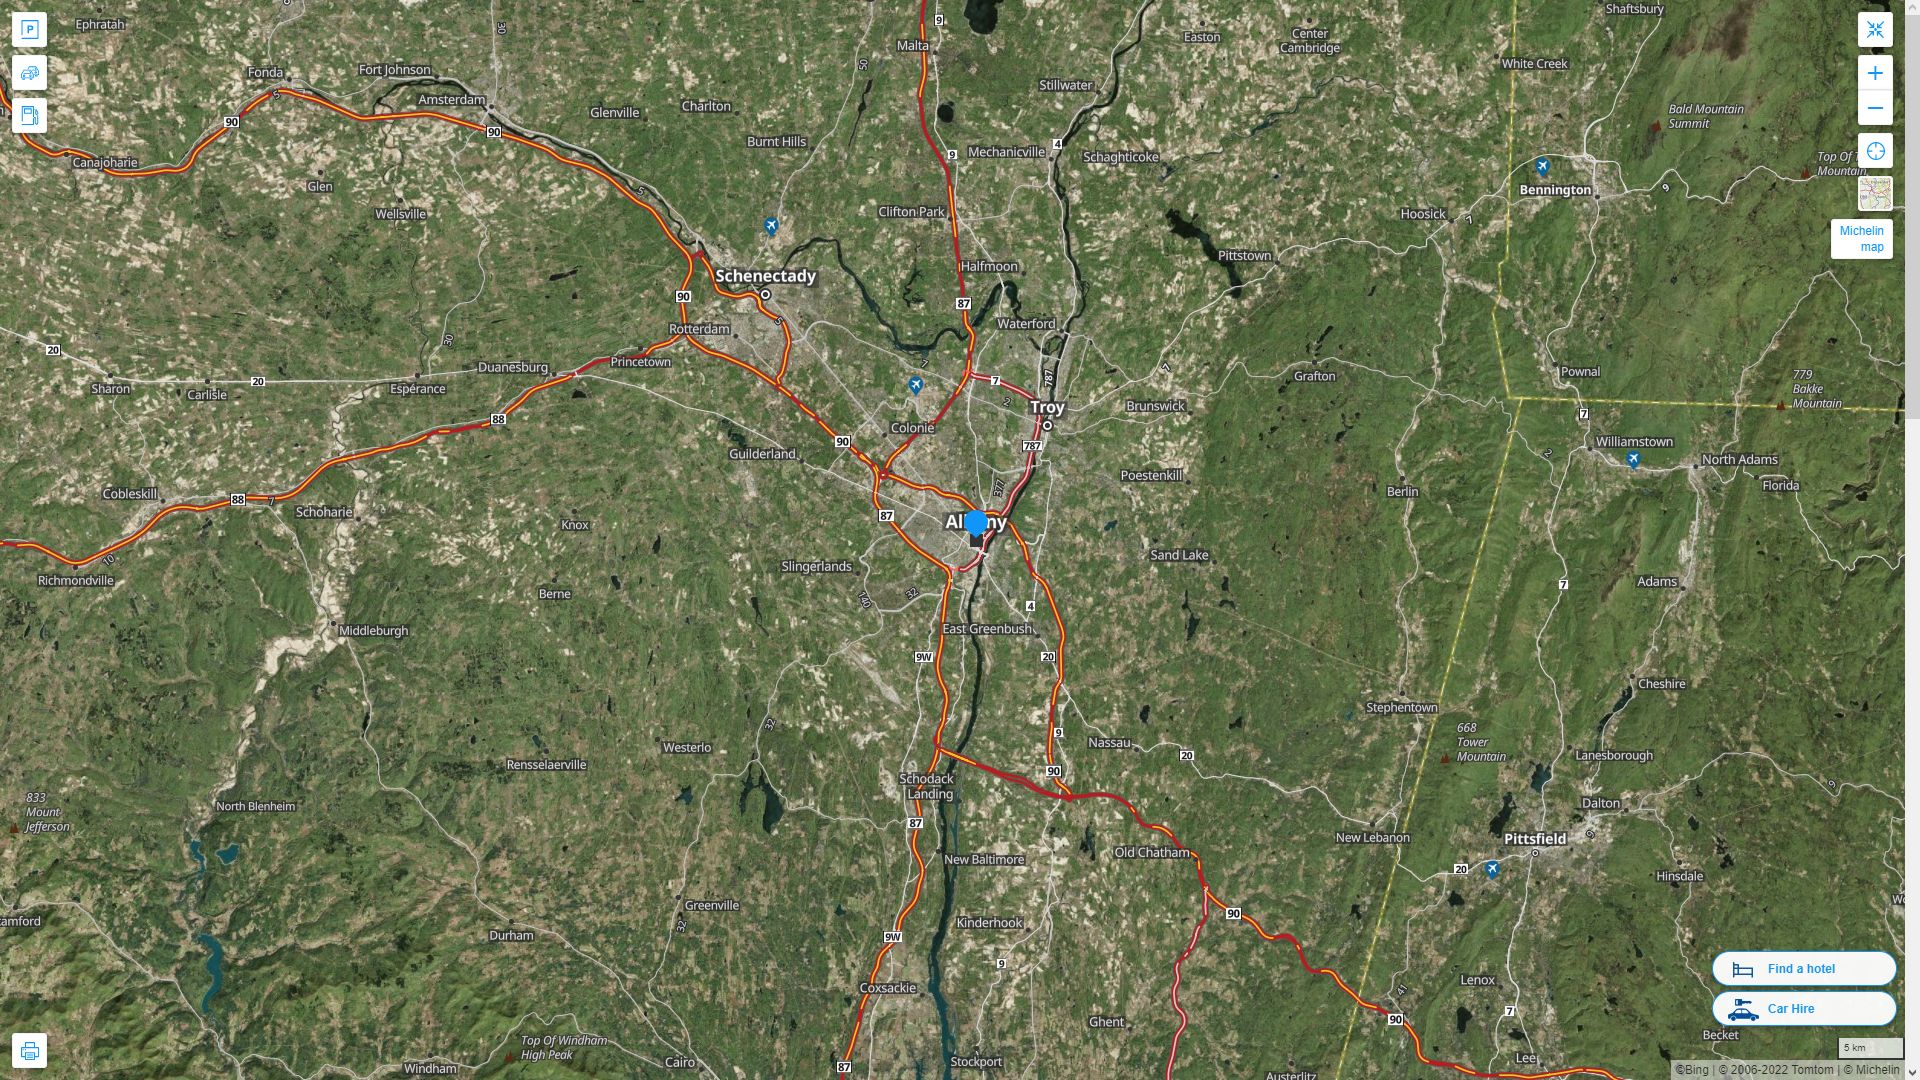 Albany New York Highway and Road Map with Satellite View